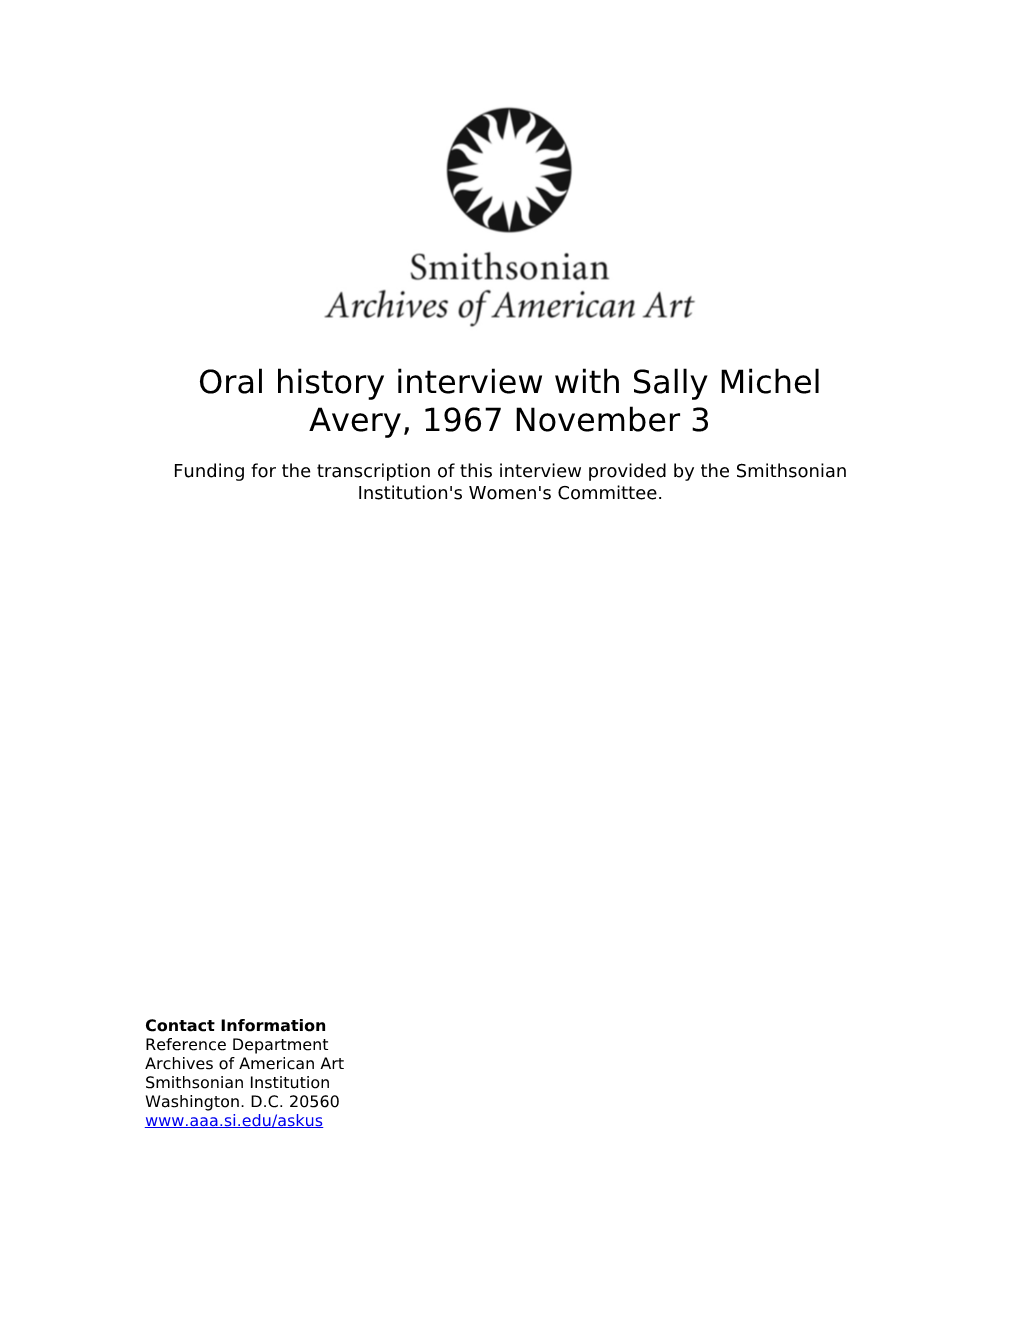 Oral History Interview with Sally Michel Avery, 1967 November 3